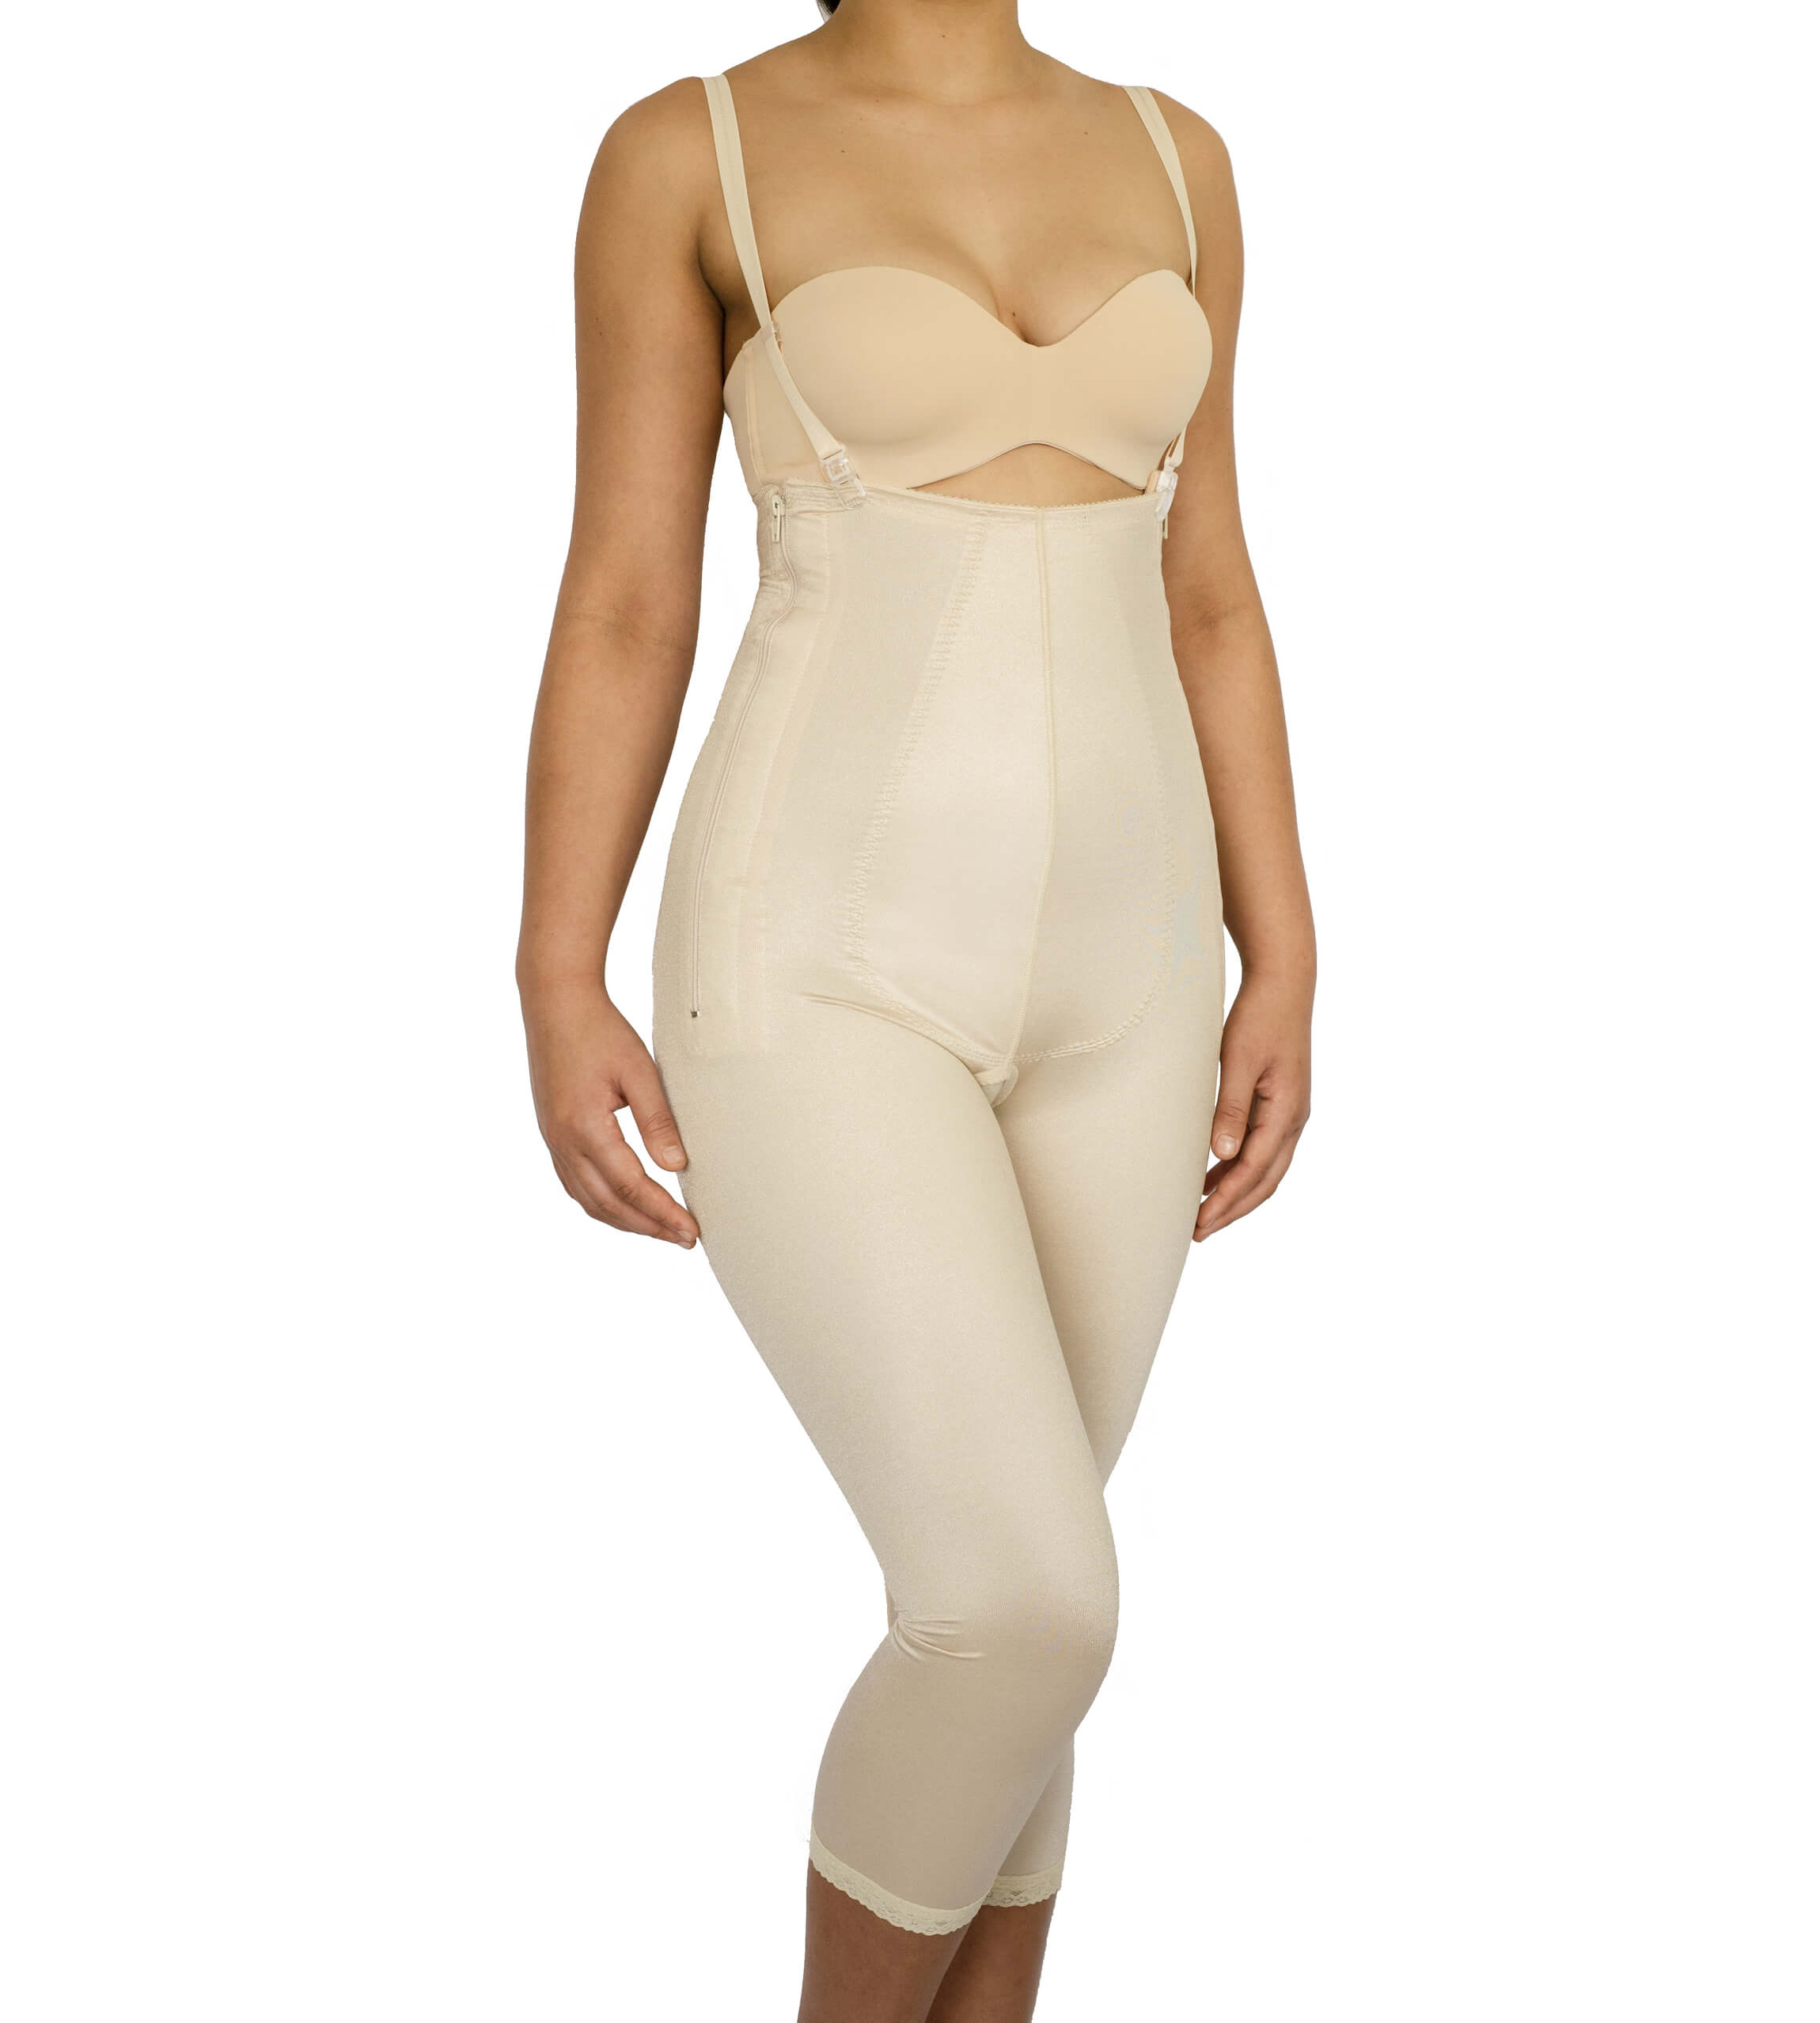 Female, Pants, Above knee, Underbust, Normal support, side Zip, Open crotch